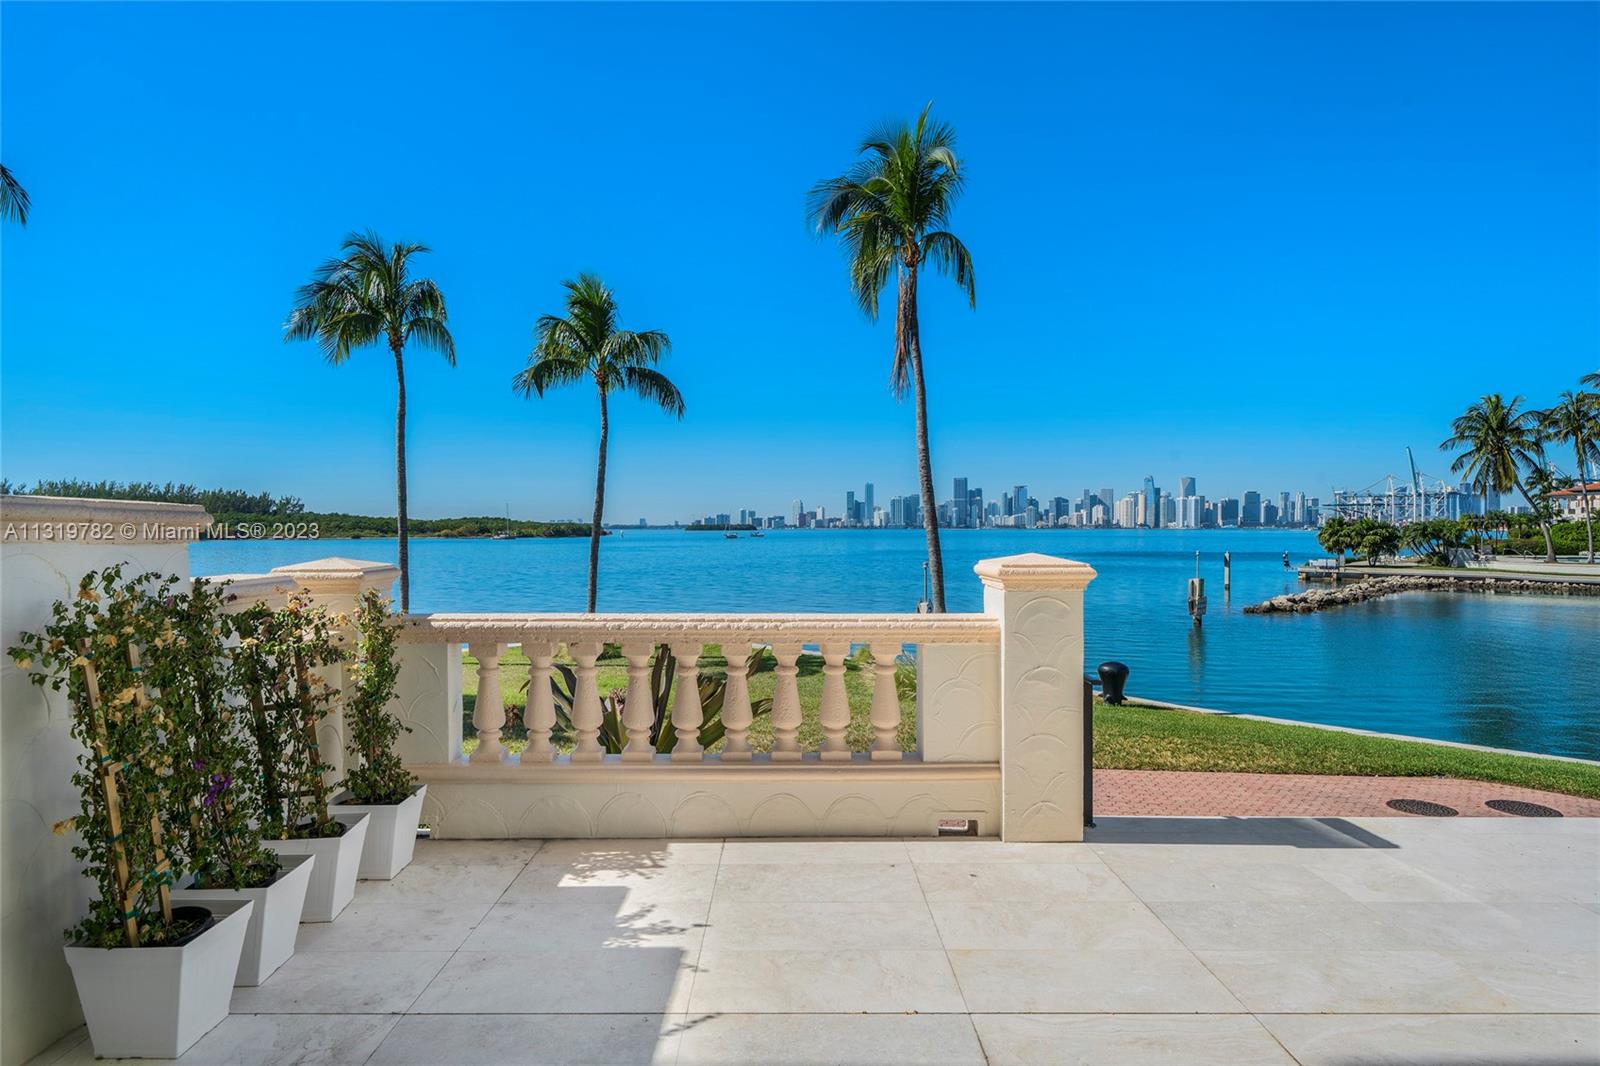 Brand new spectacular renovation! This most sought-after ground floor 3BR/3+1BA corner unit sits on the point of Fisher Island providing spectacular sunsets over the downtown Miami Skyline & panoramic unobstructed views of Biscayne Bay, Fisher Island Marina & Virginia Key. This magnificent unit boasts fine oak hardwood floors, 3,317 SF w/ open living and dining areas surrounded by walls of glass w/ direct bay/city views & access to a full wrapping terrace. A Chef’s kitchen sports La Corneu cooktop, top-of-the-line appliances & crystal agate center island with eat-in seating. The sumptuous principal suite features a seating area, large walk-in closets and stunning principal bathroom w/ dolomite floors and walk-in rain shower. The 2 other bedrooms each uniquely designed with en-suite baths.